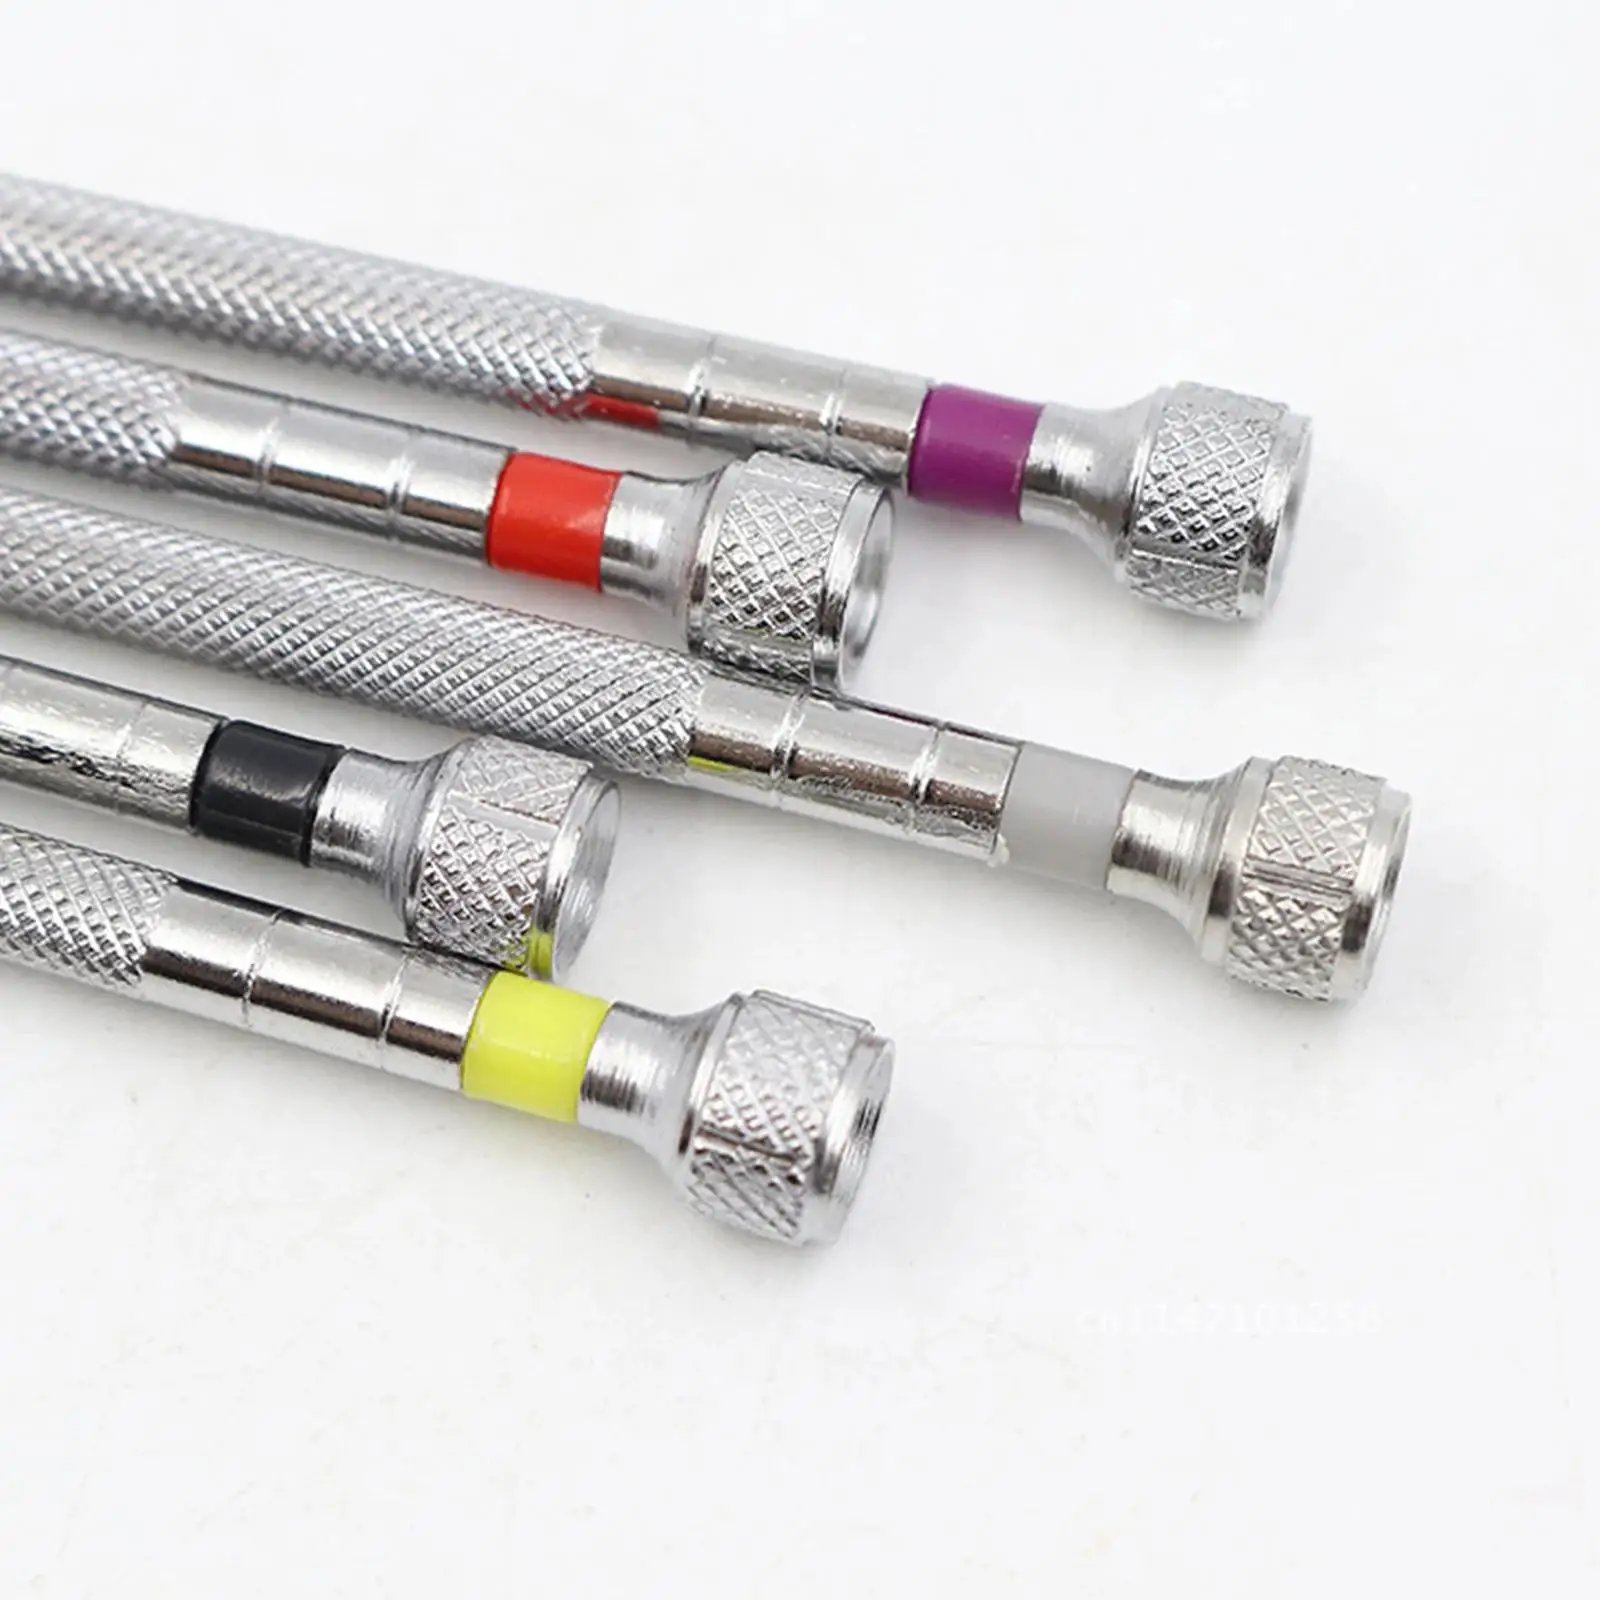 

5pcs Small Precision Screwdriver Set with Phillips Slotted Bits for Watch Glasses Repair Tools 0.8-1.6mm